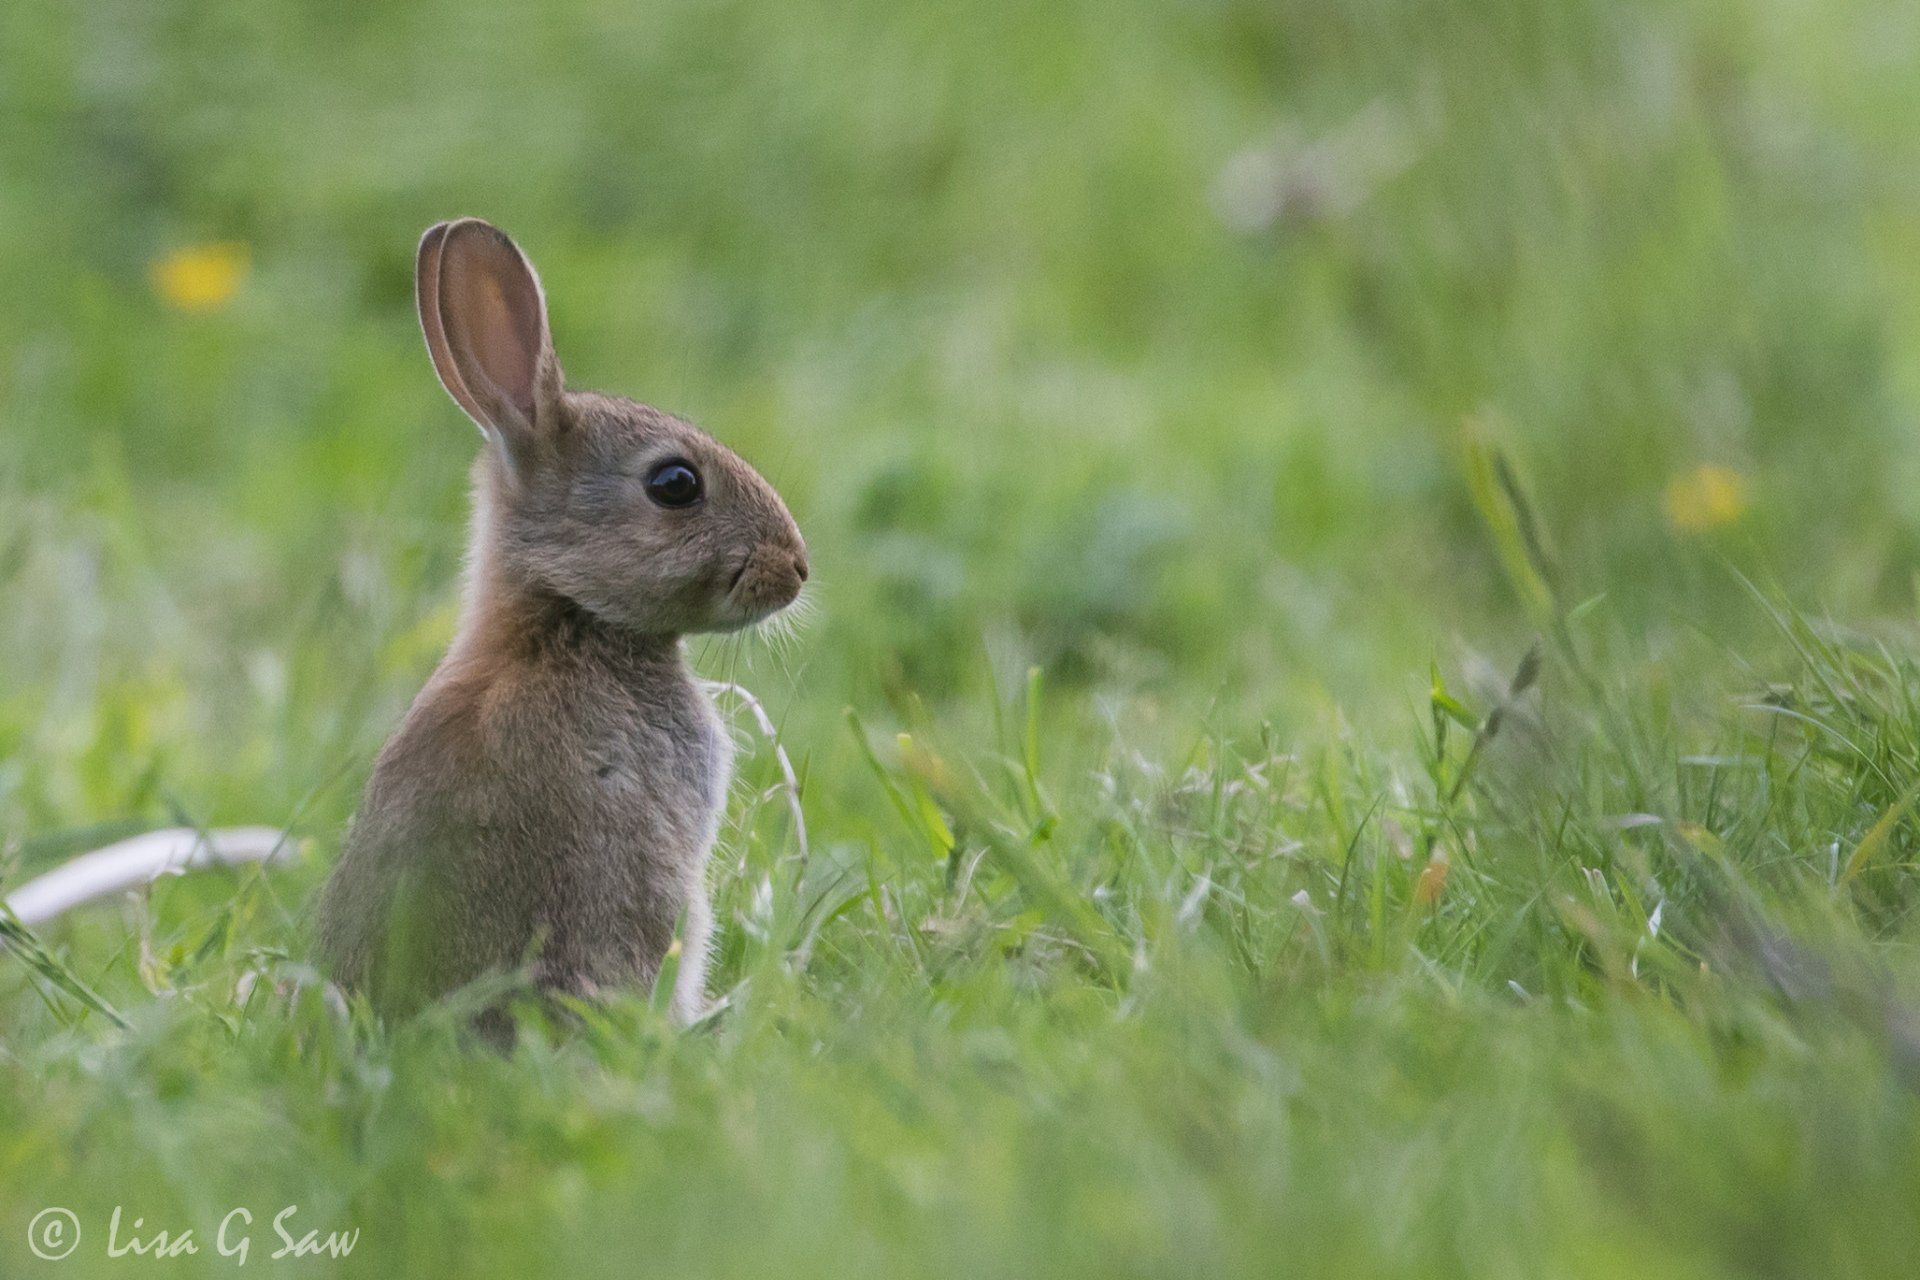 Young rabbit in side profile